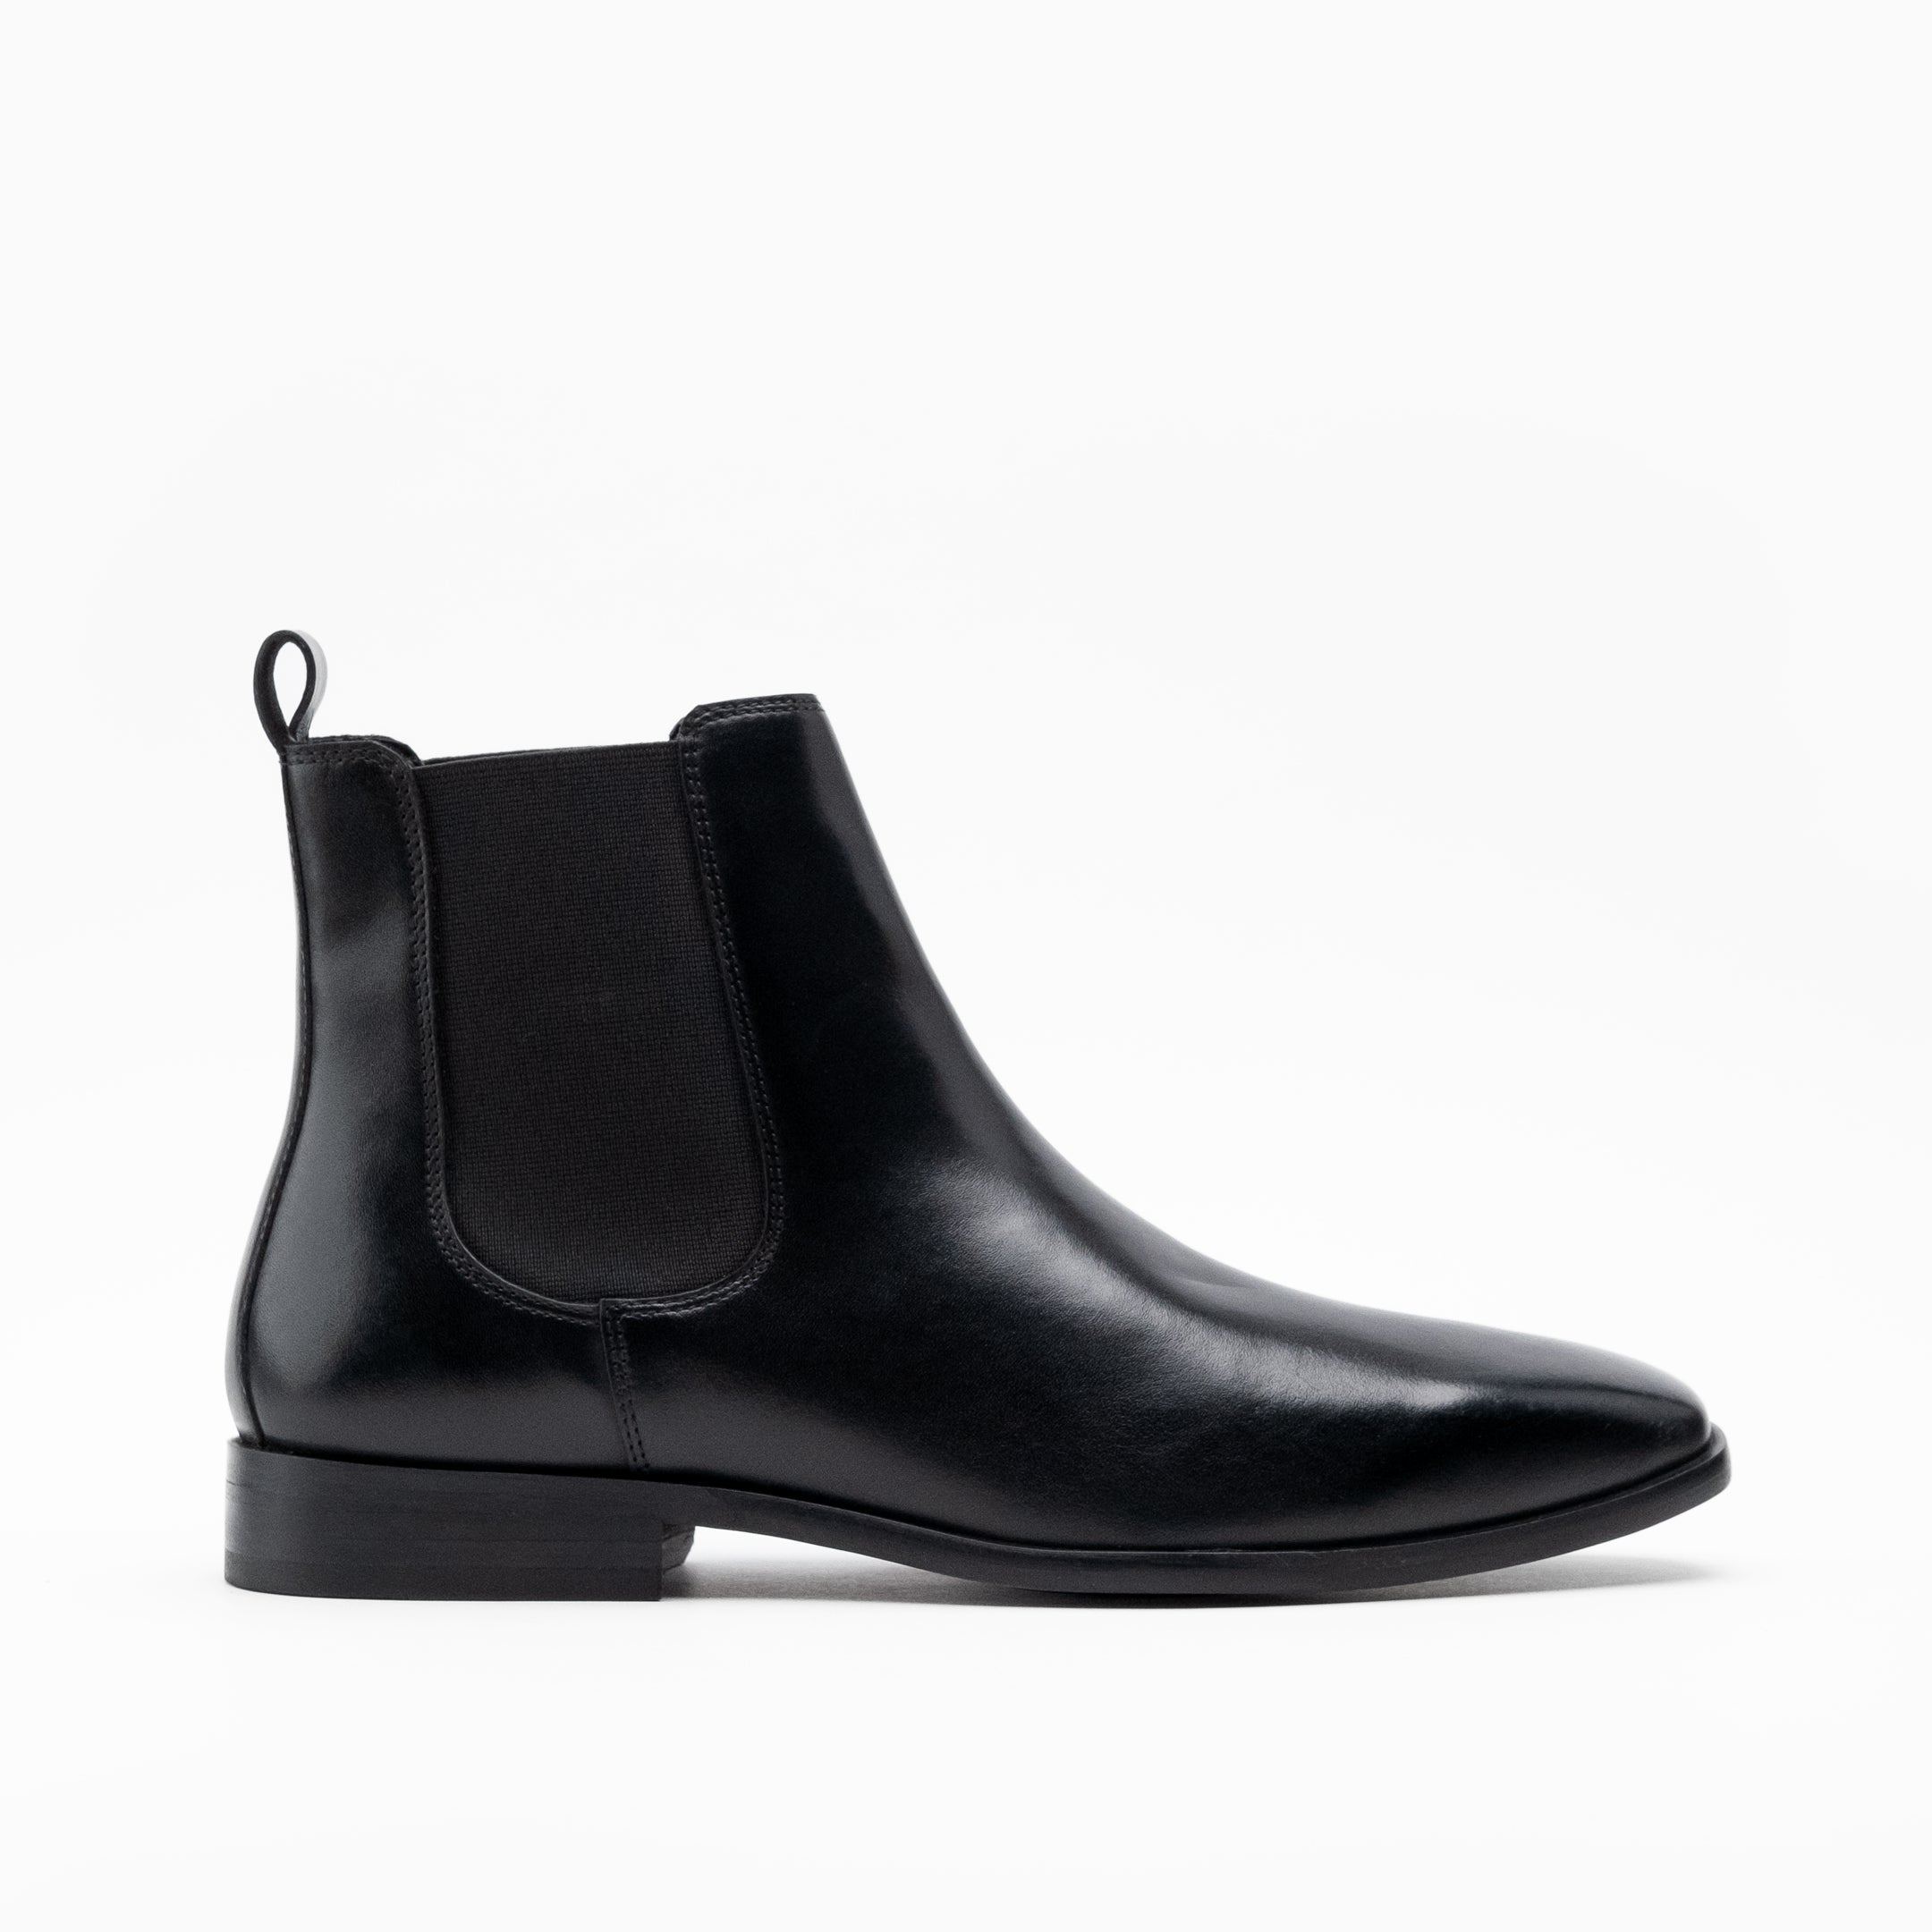 Walk London Mens City Chelsea Boot in Black Leather